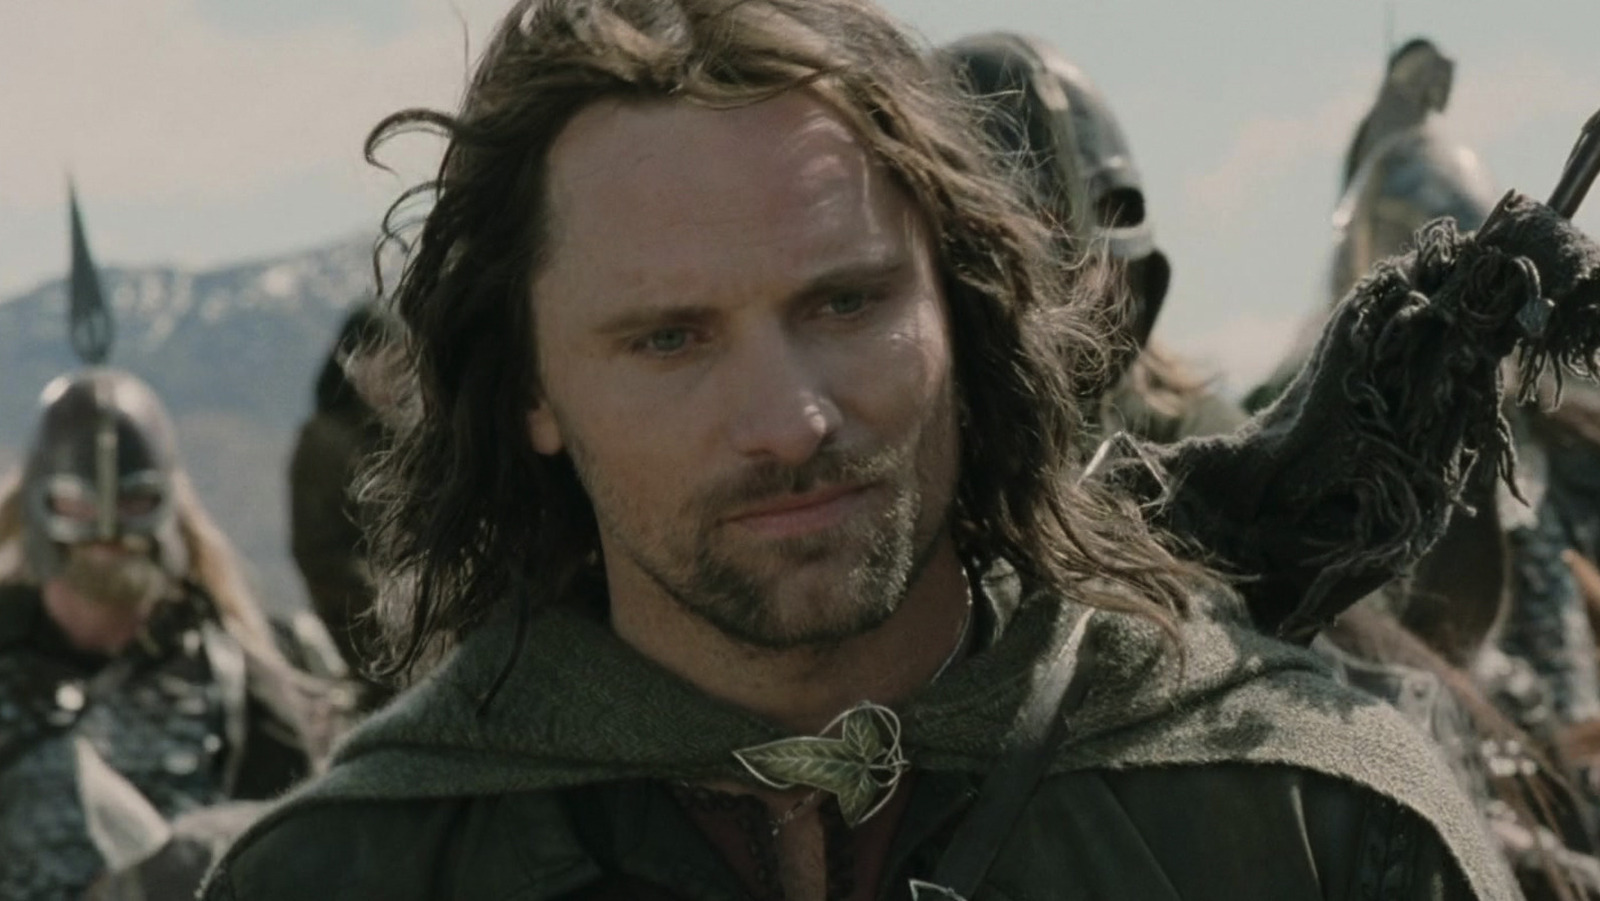 A Lord Of The Rings Anime Movie War Of The Rohirrim Is In The Works